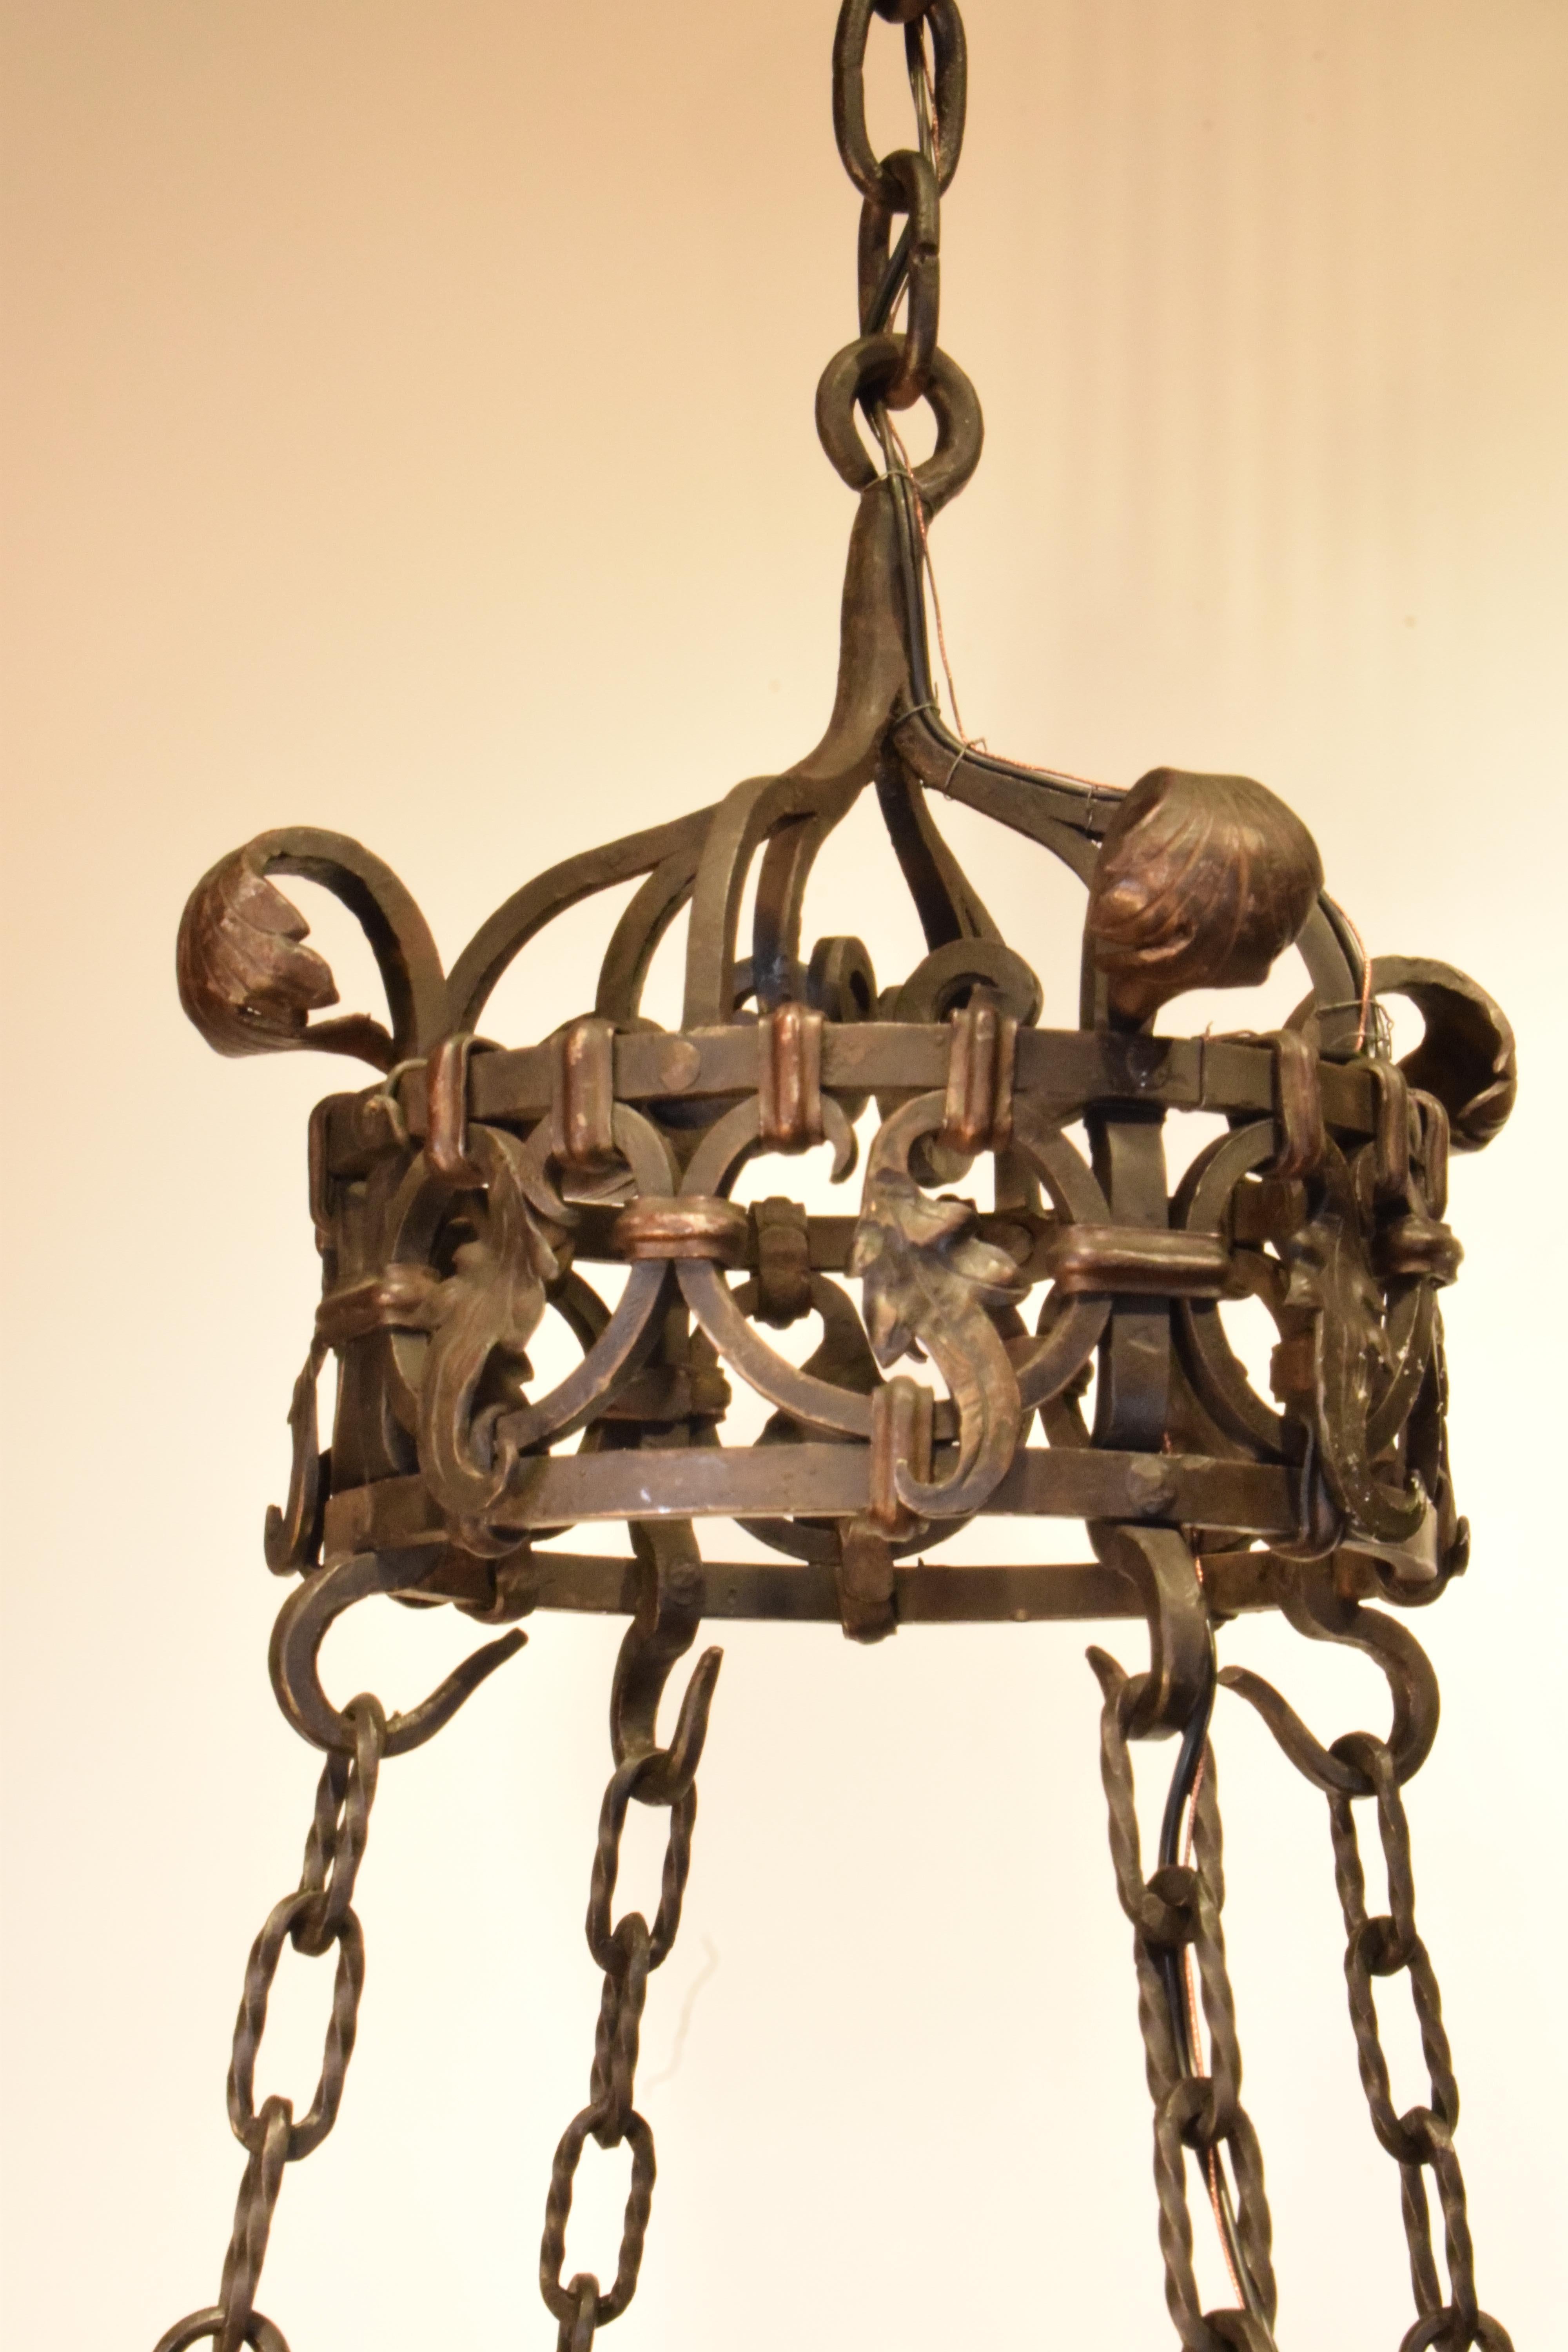 A Very Fine Iron Chandelier, the pierced circle issuing four lights on top and four arms with lights suspended by four chains. Elaborately decorated crown. 
France, circa 1890. 
CW5375